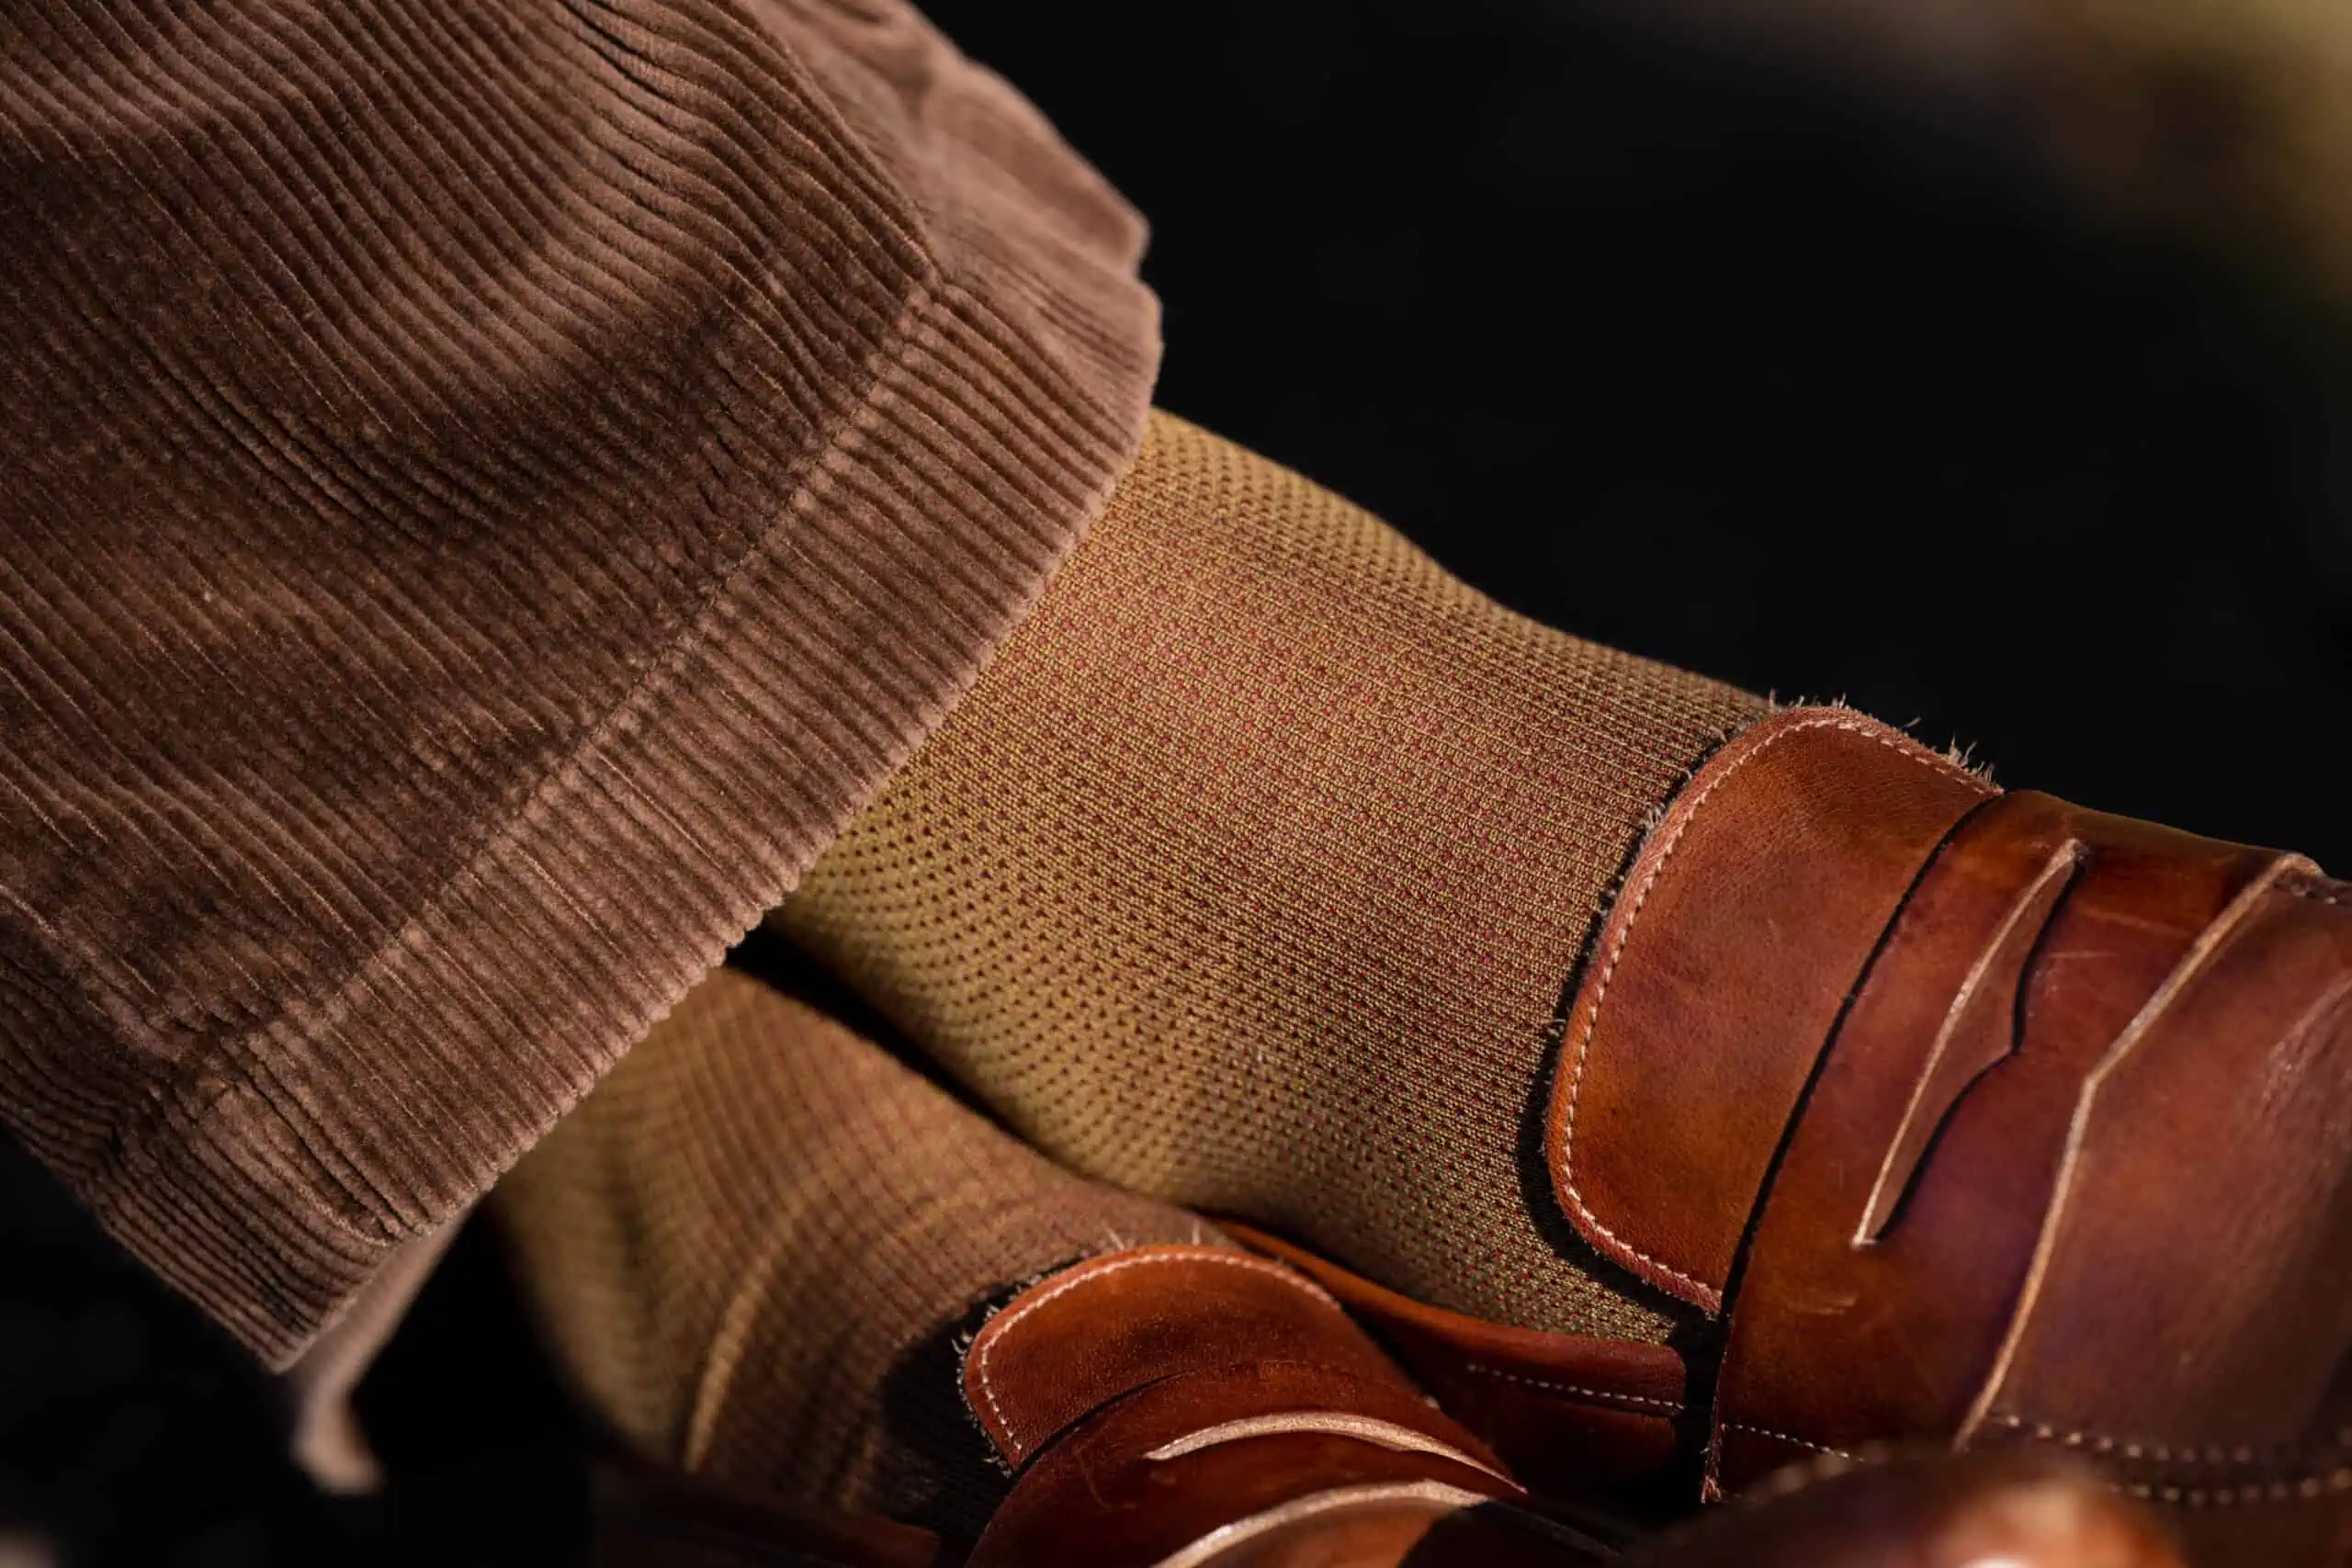 A close up photo of brown loafers worn with khaki and red socks